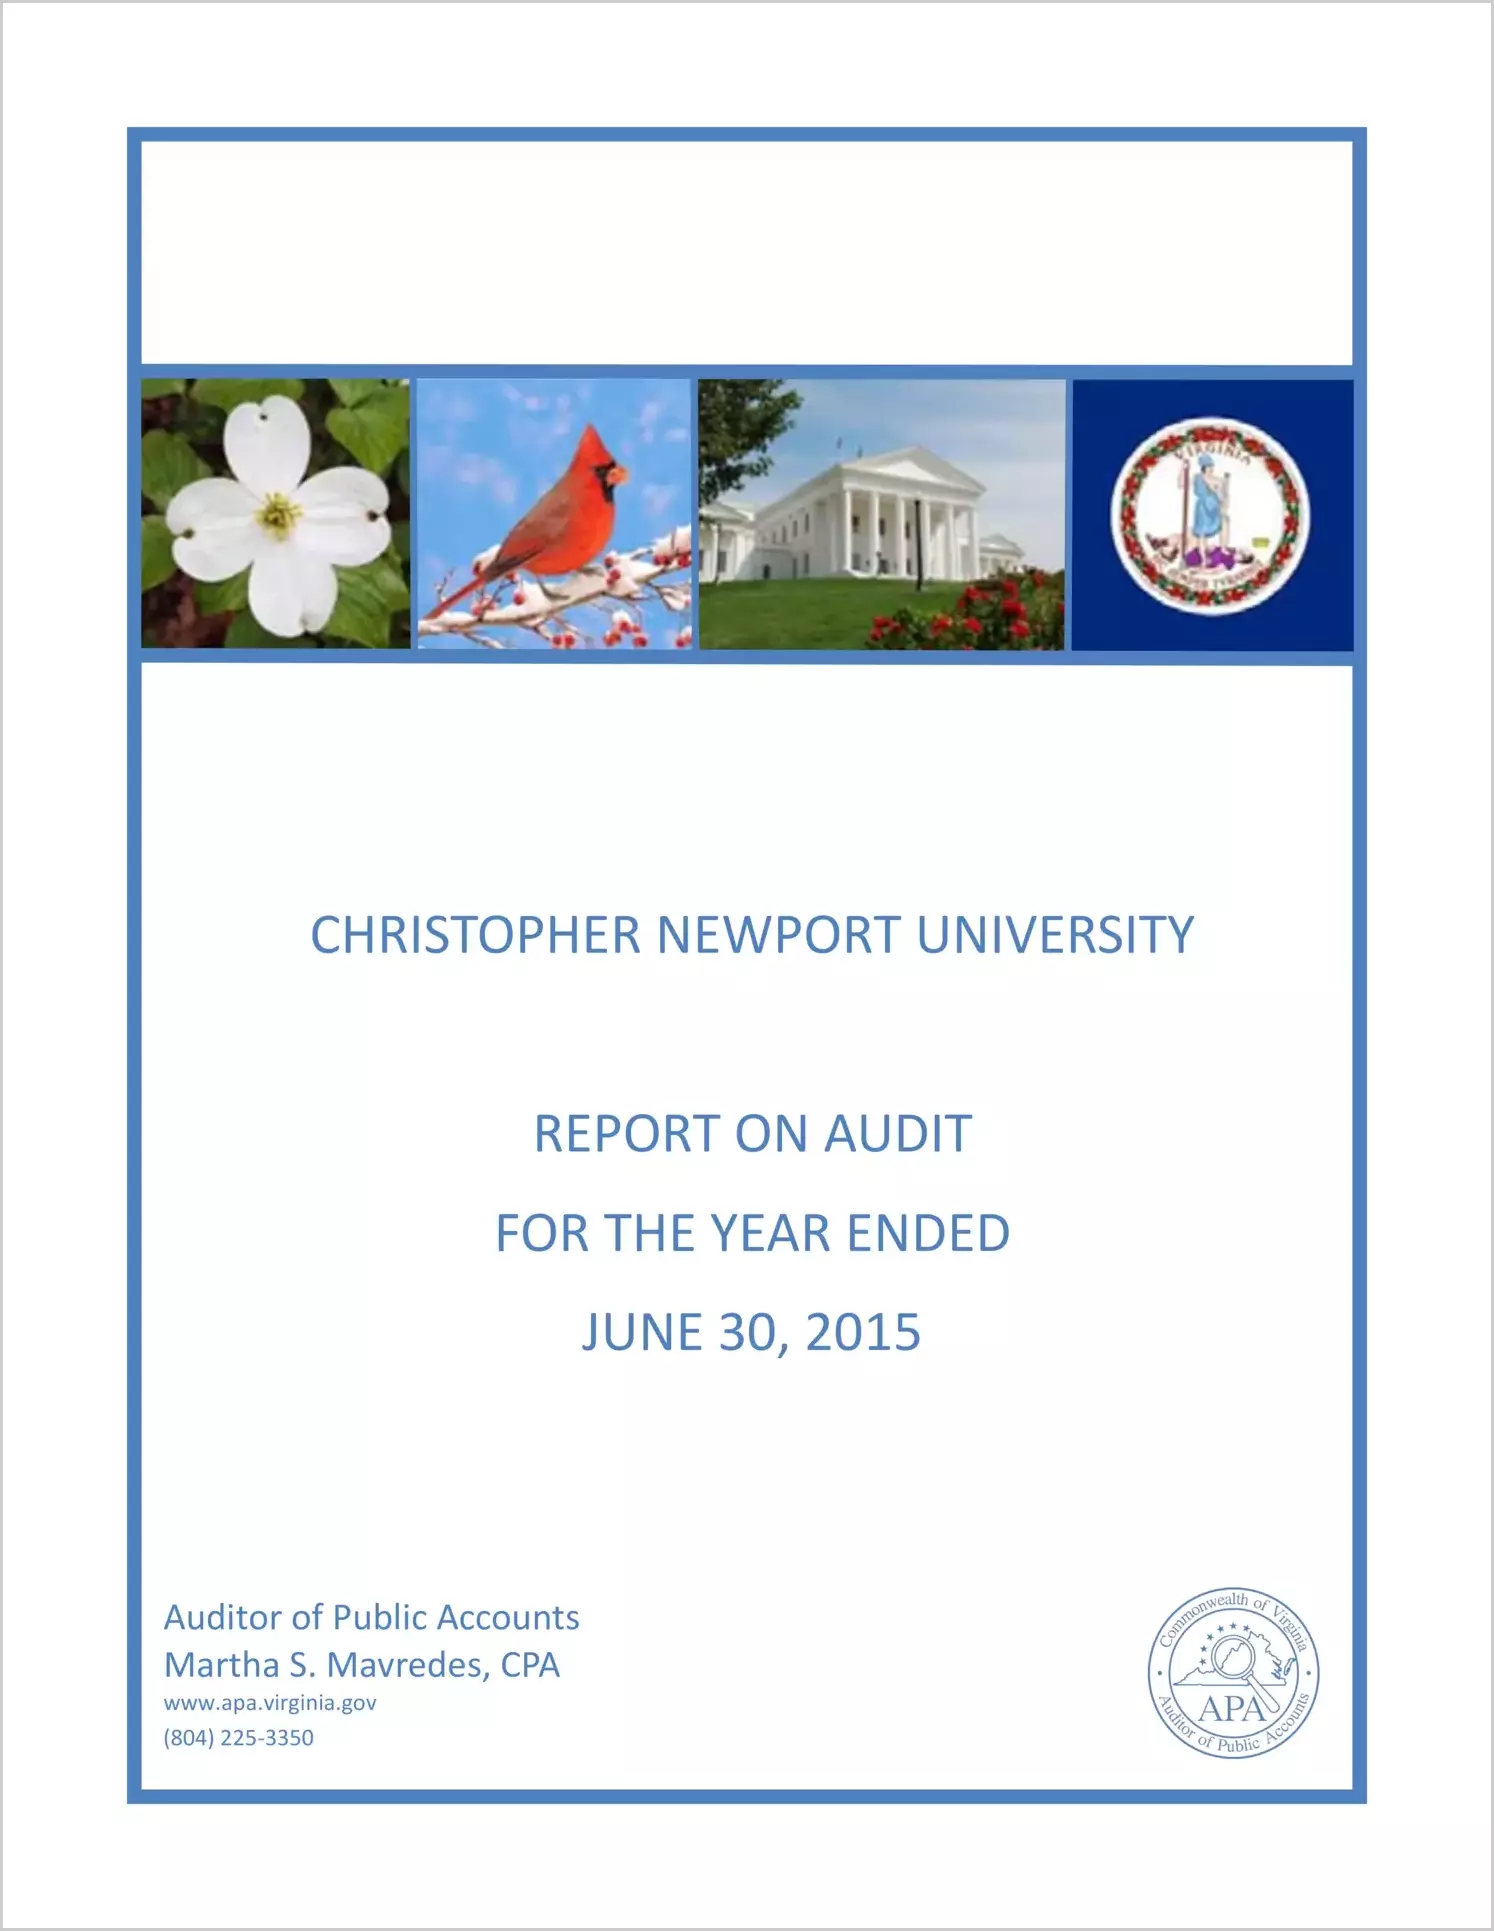 Christopher Newport University for the year ended June 30, 2015